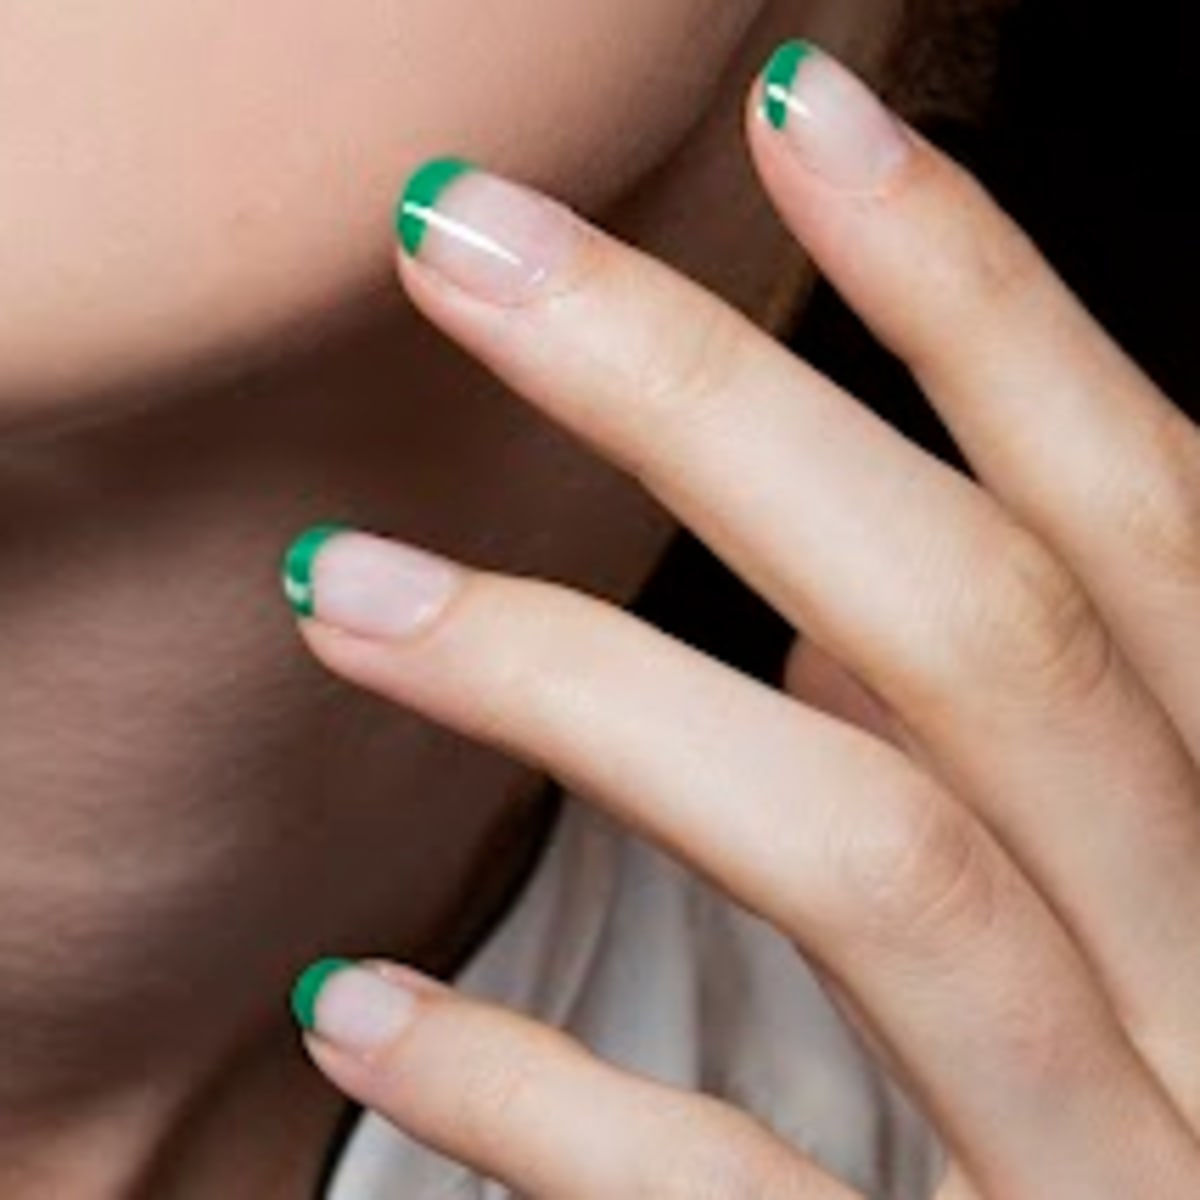 Chic and Cool: Choosing the Perfect January Nail Color